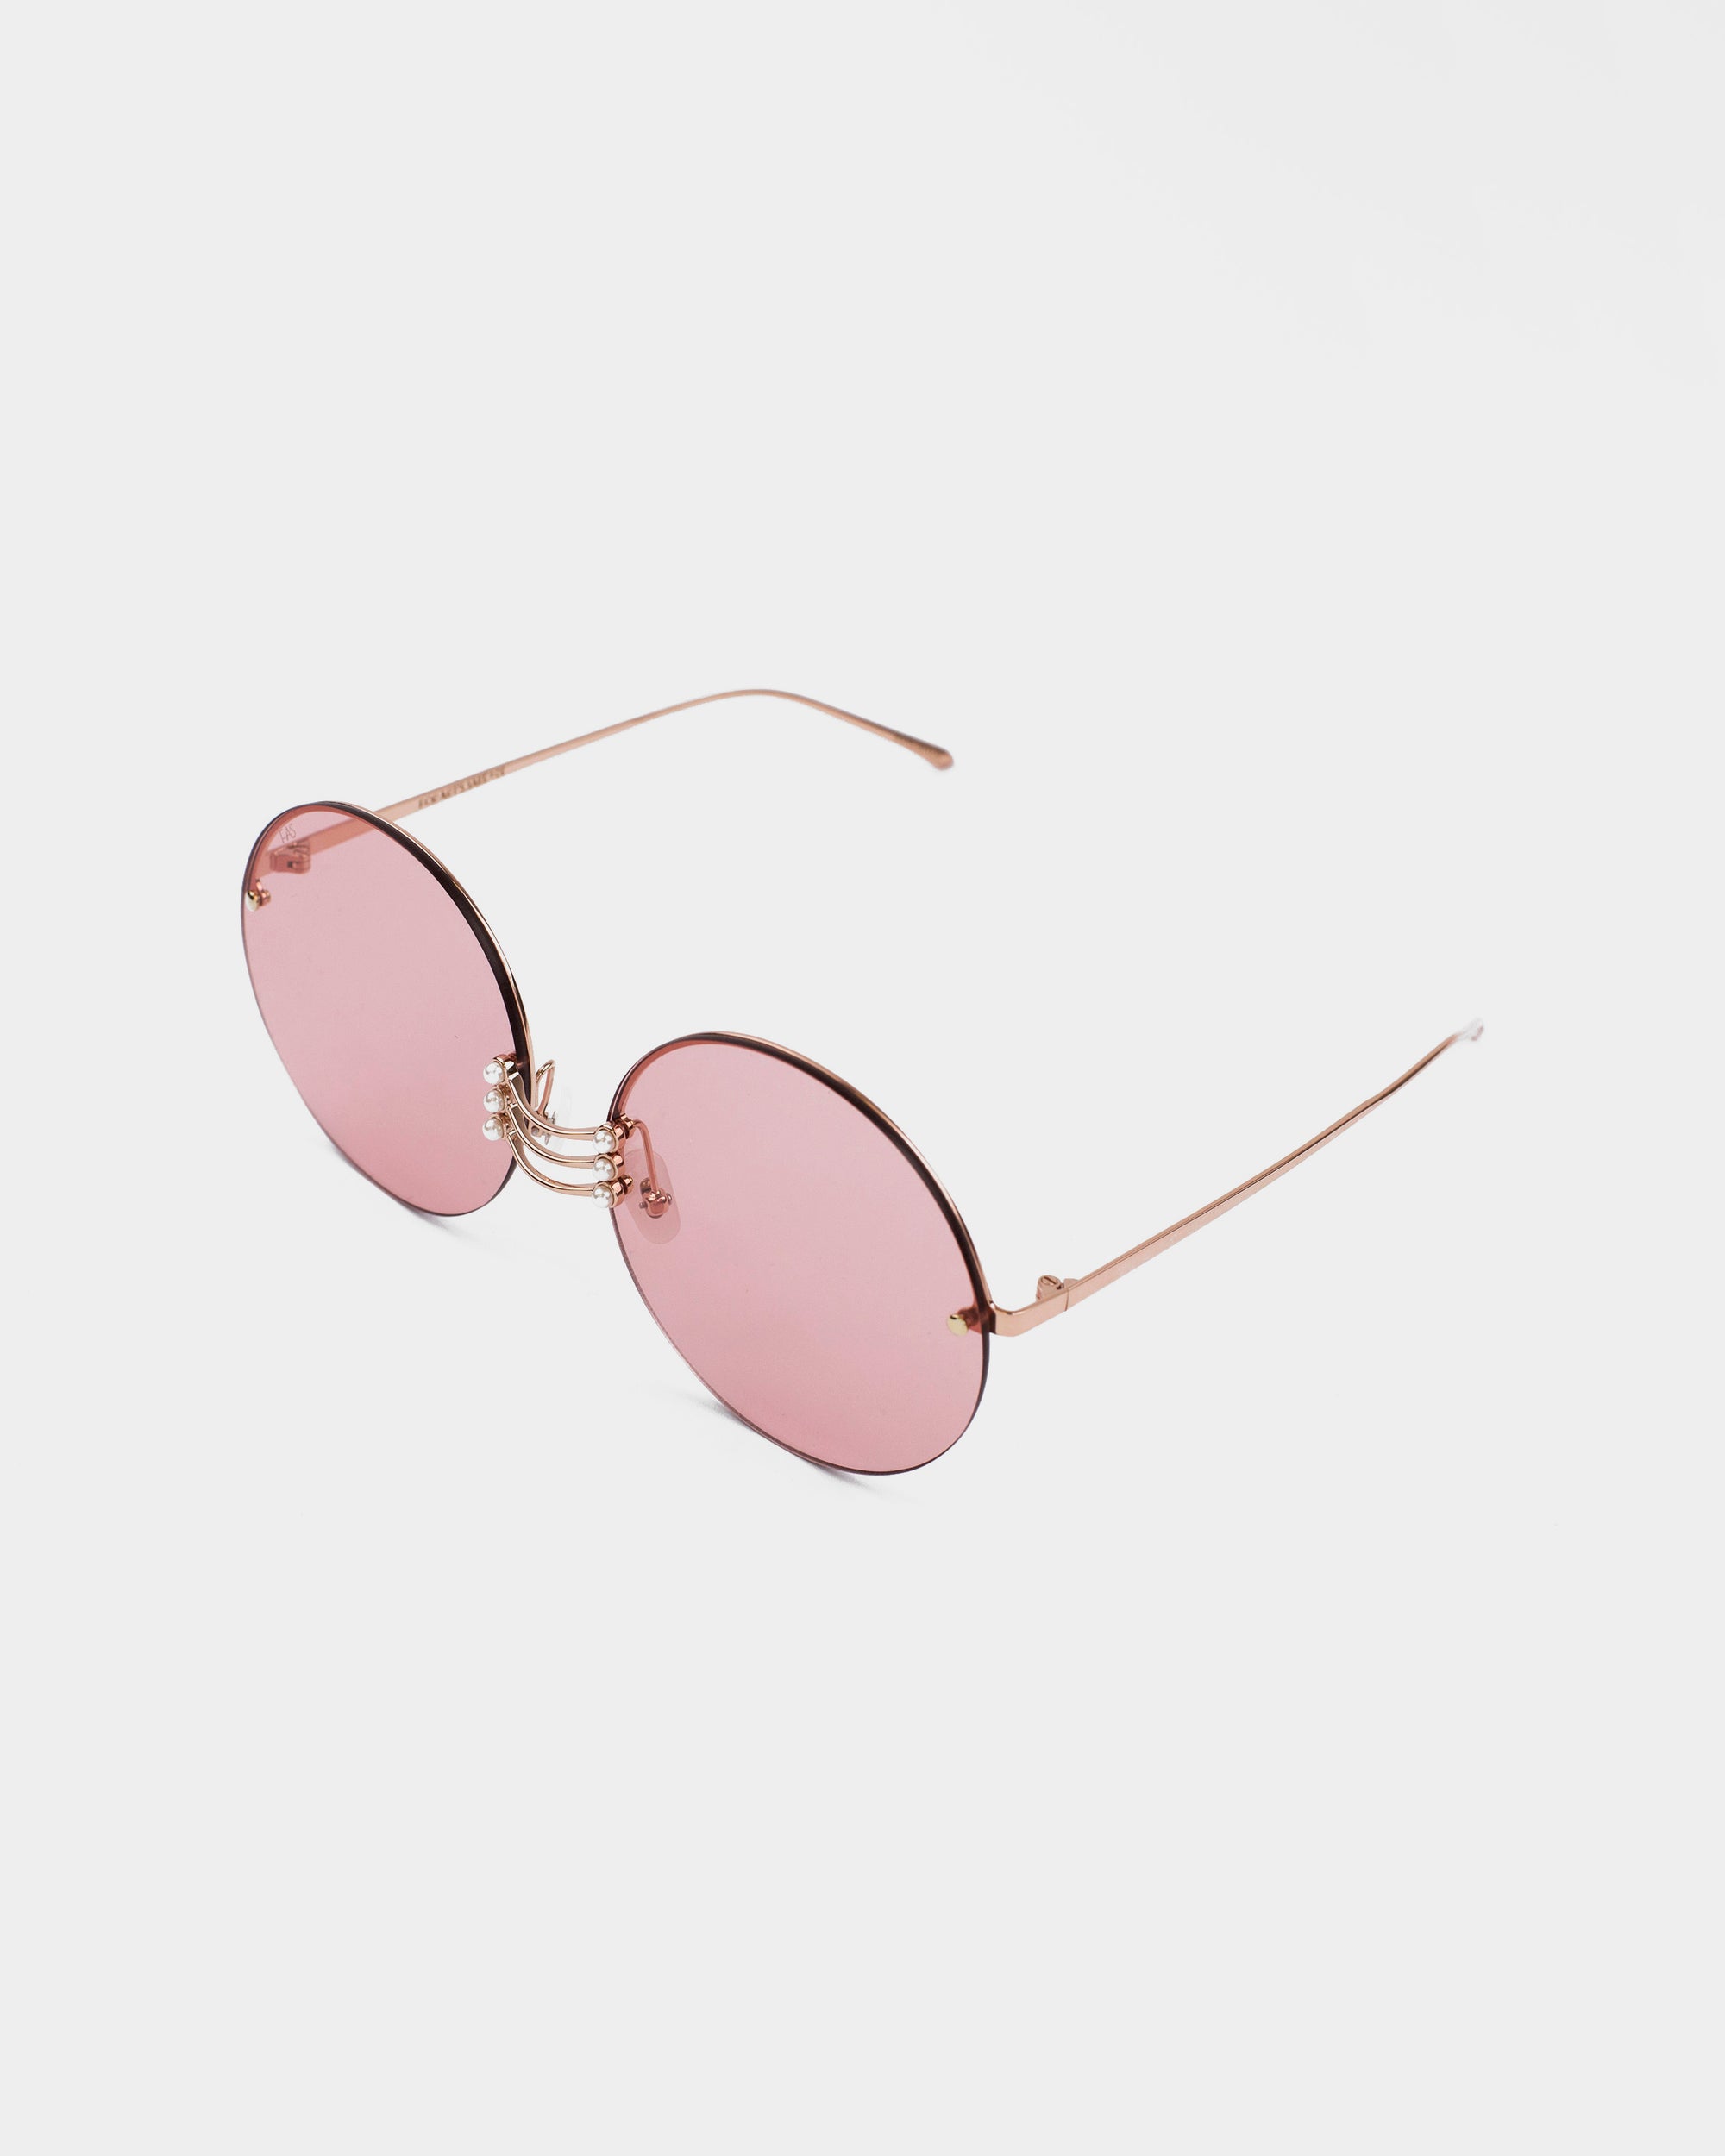 A pair of Vermeer sunglasses by For Art&#39;s Sake® with round, pink-tinted lenses and thin, gold-colored metal frames. The large lenses offer UV protection with a light pink hue. The thin arms and nose bridge are minimalist, adding an elegant touch to the eyewear&#39;s design. Stainless steel frames ensure durability, and the background is white.